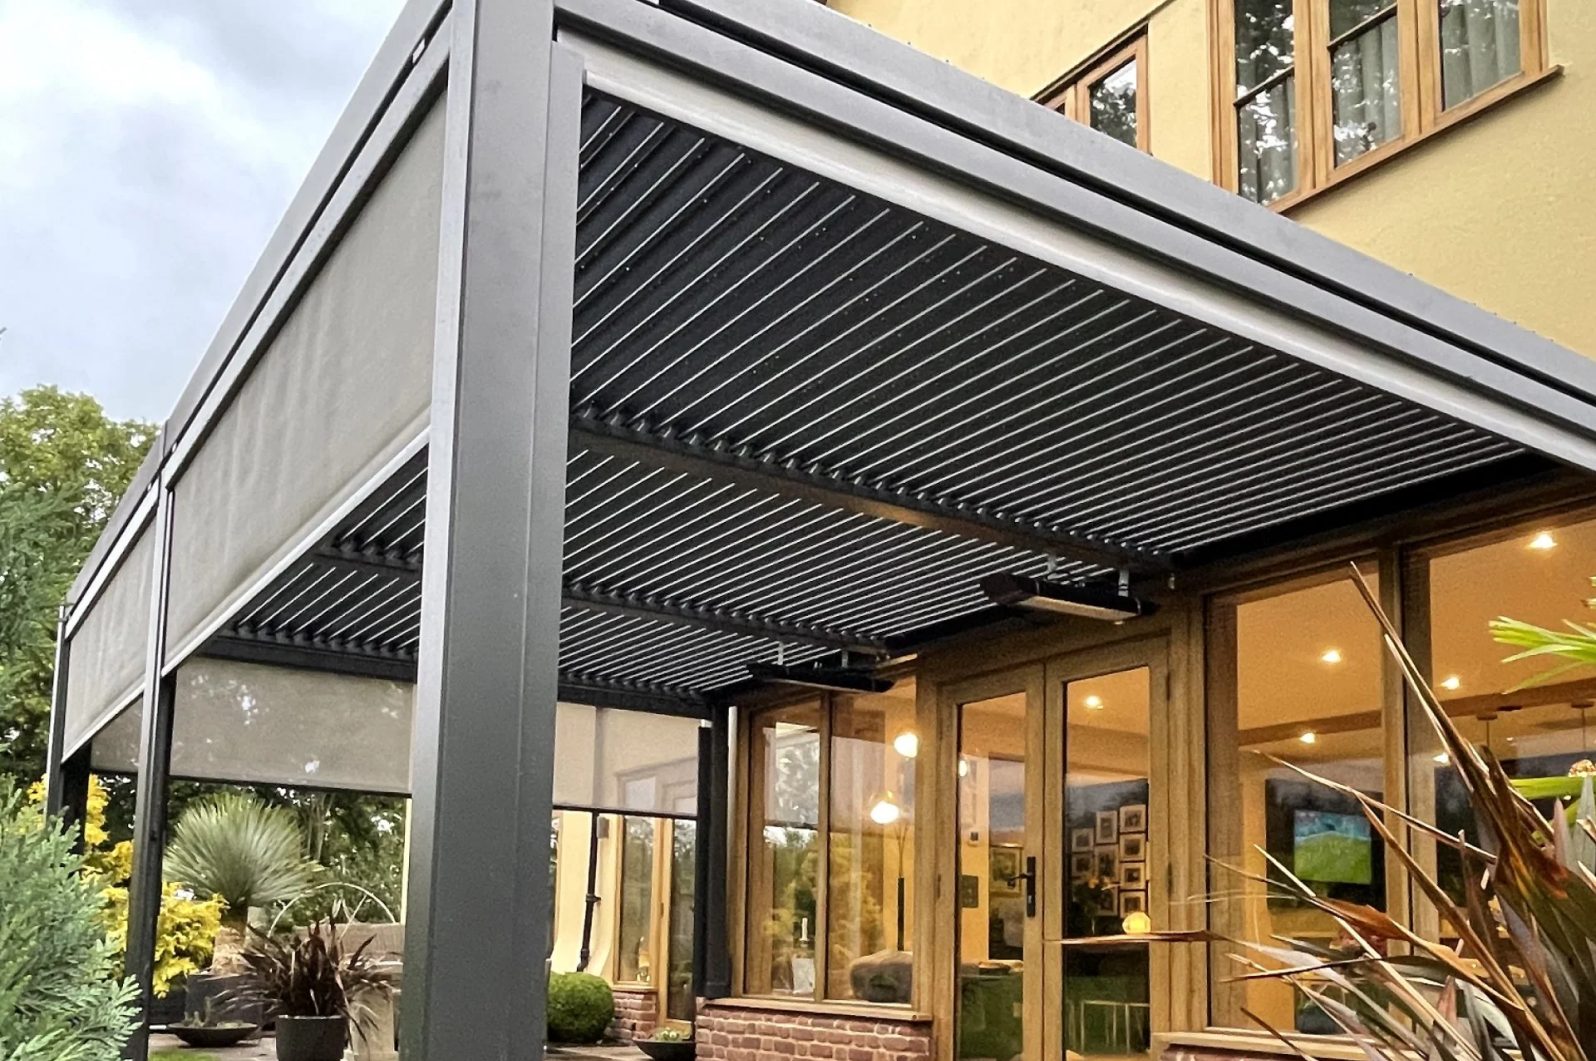 Mount your Sun Lifestyle Pergola to the back of your house